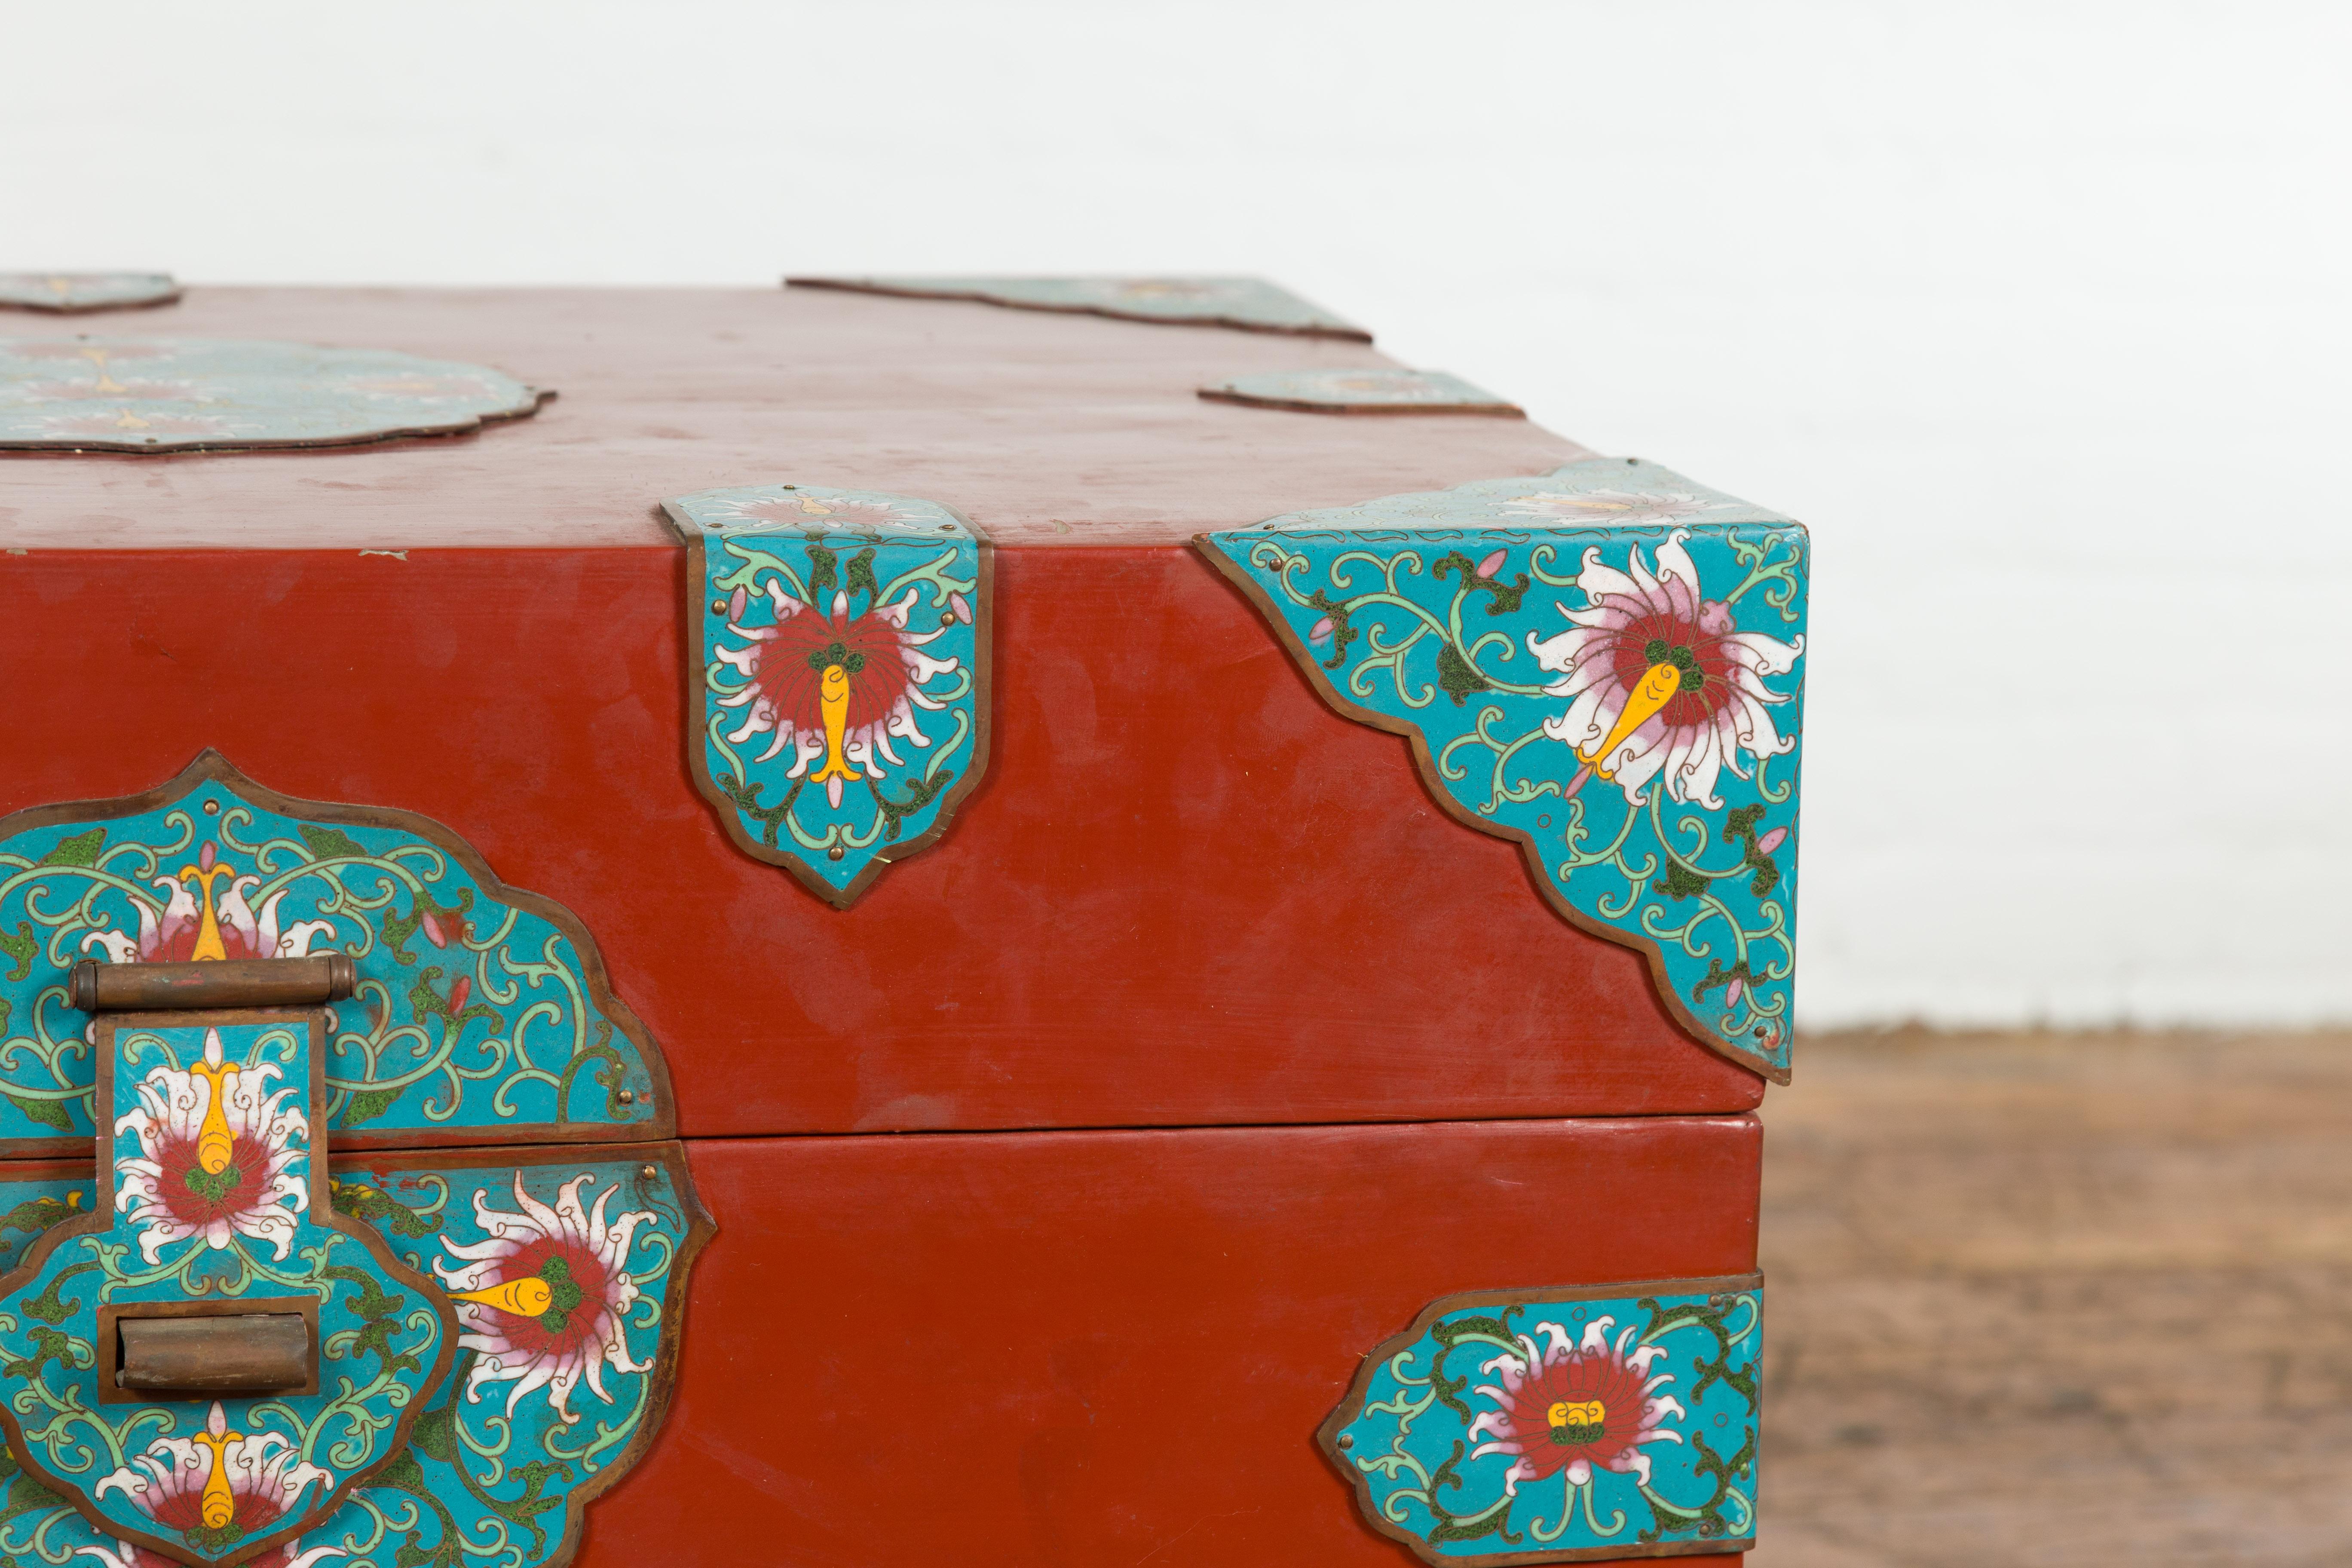 Chinese Vintage Blanket Chest with Red Lacquer and Cloisonné Floral Décor For Sale 4